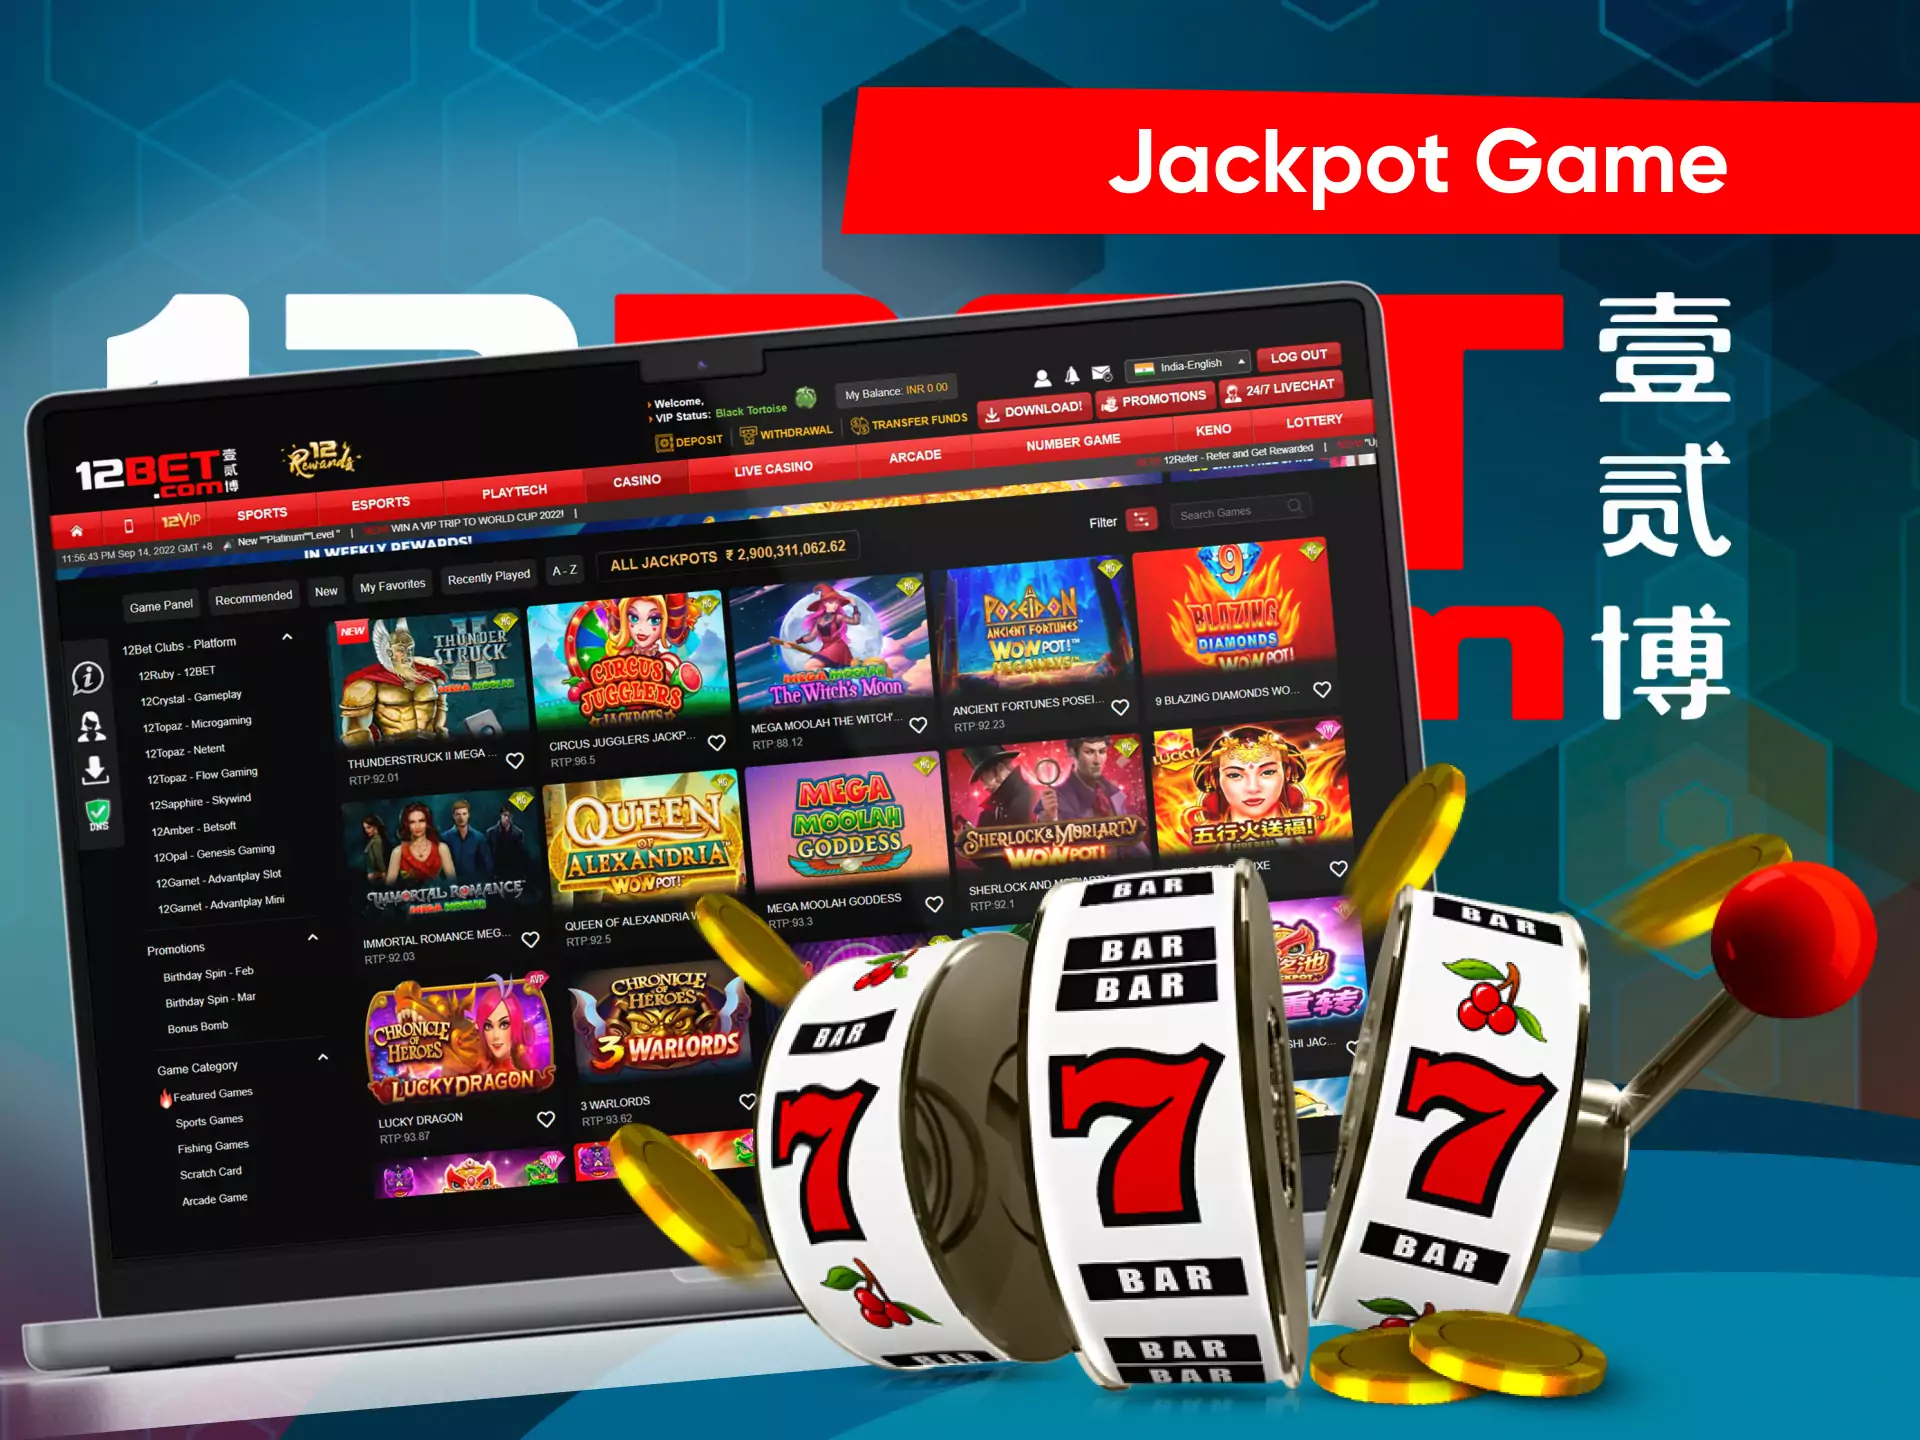 In the 12bet casino, you can win a jackpot.